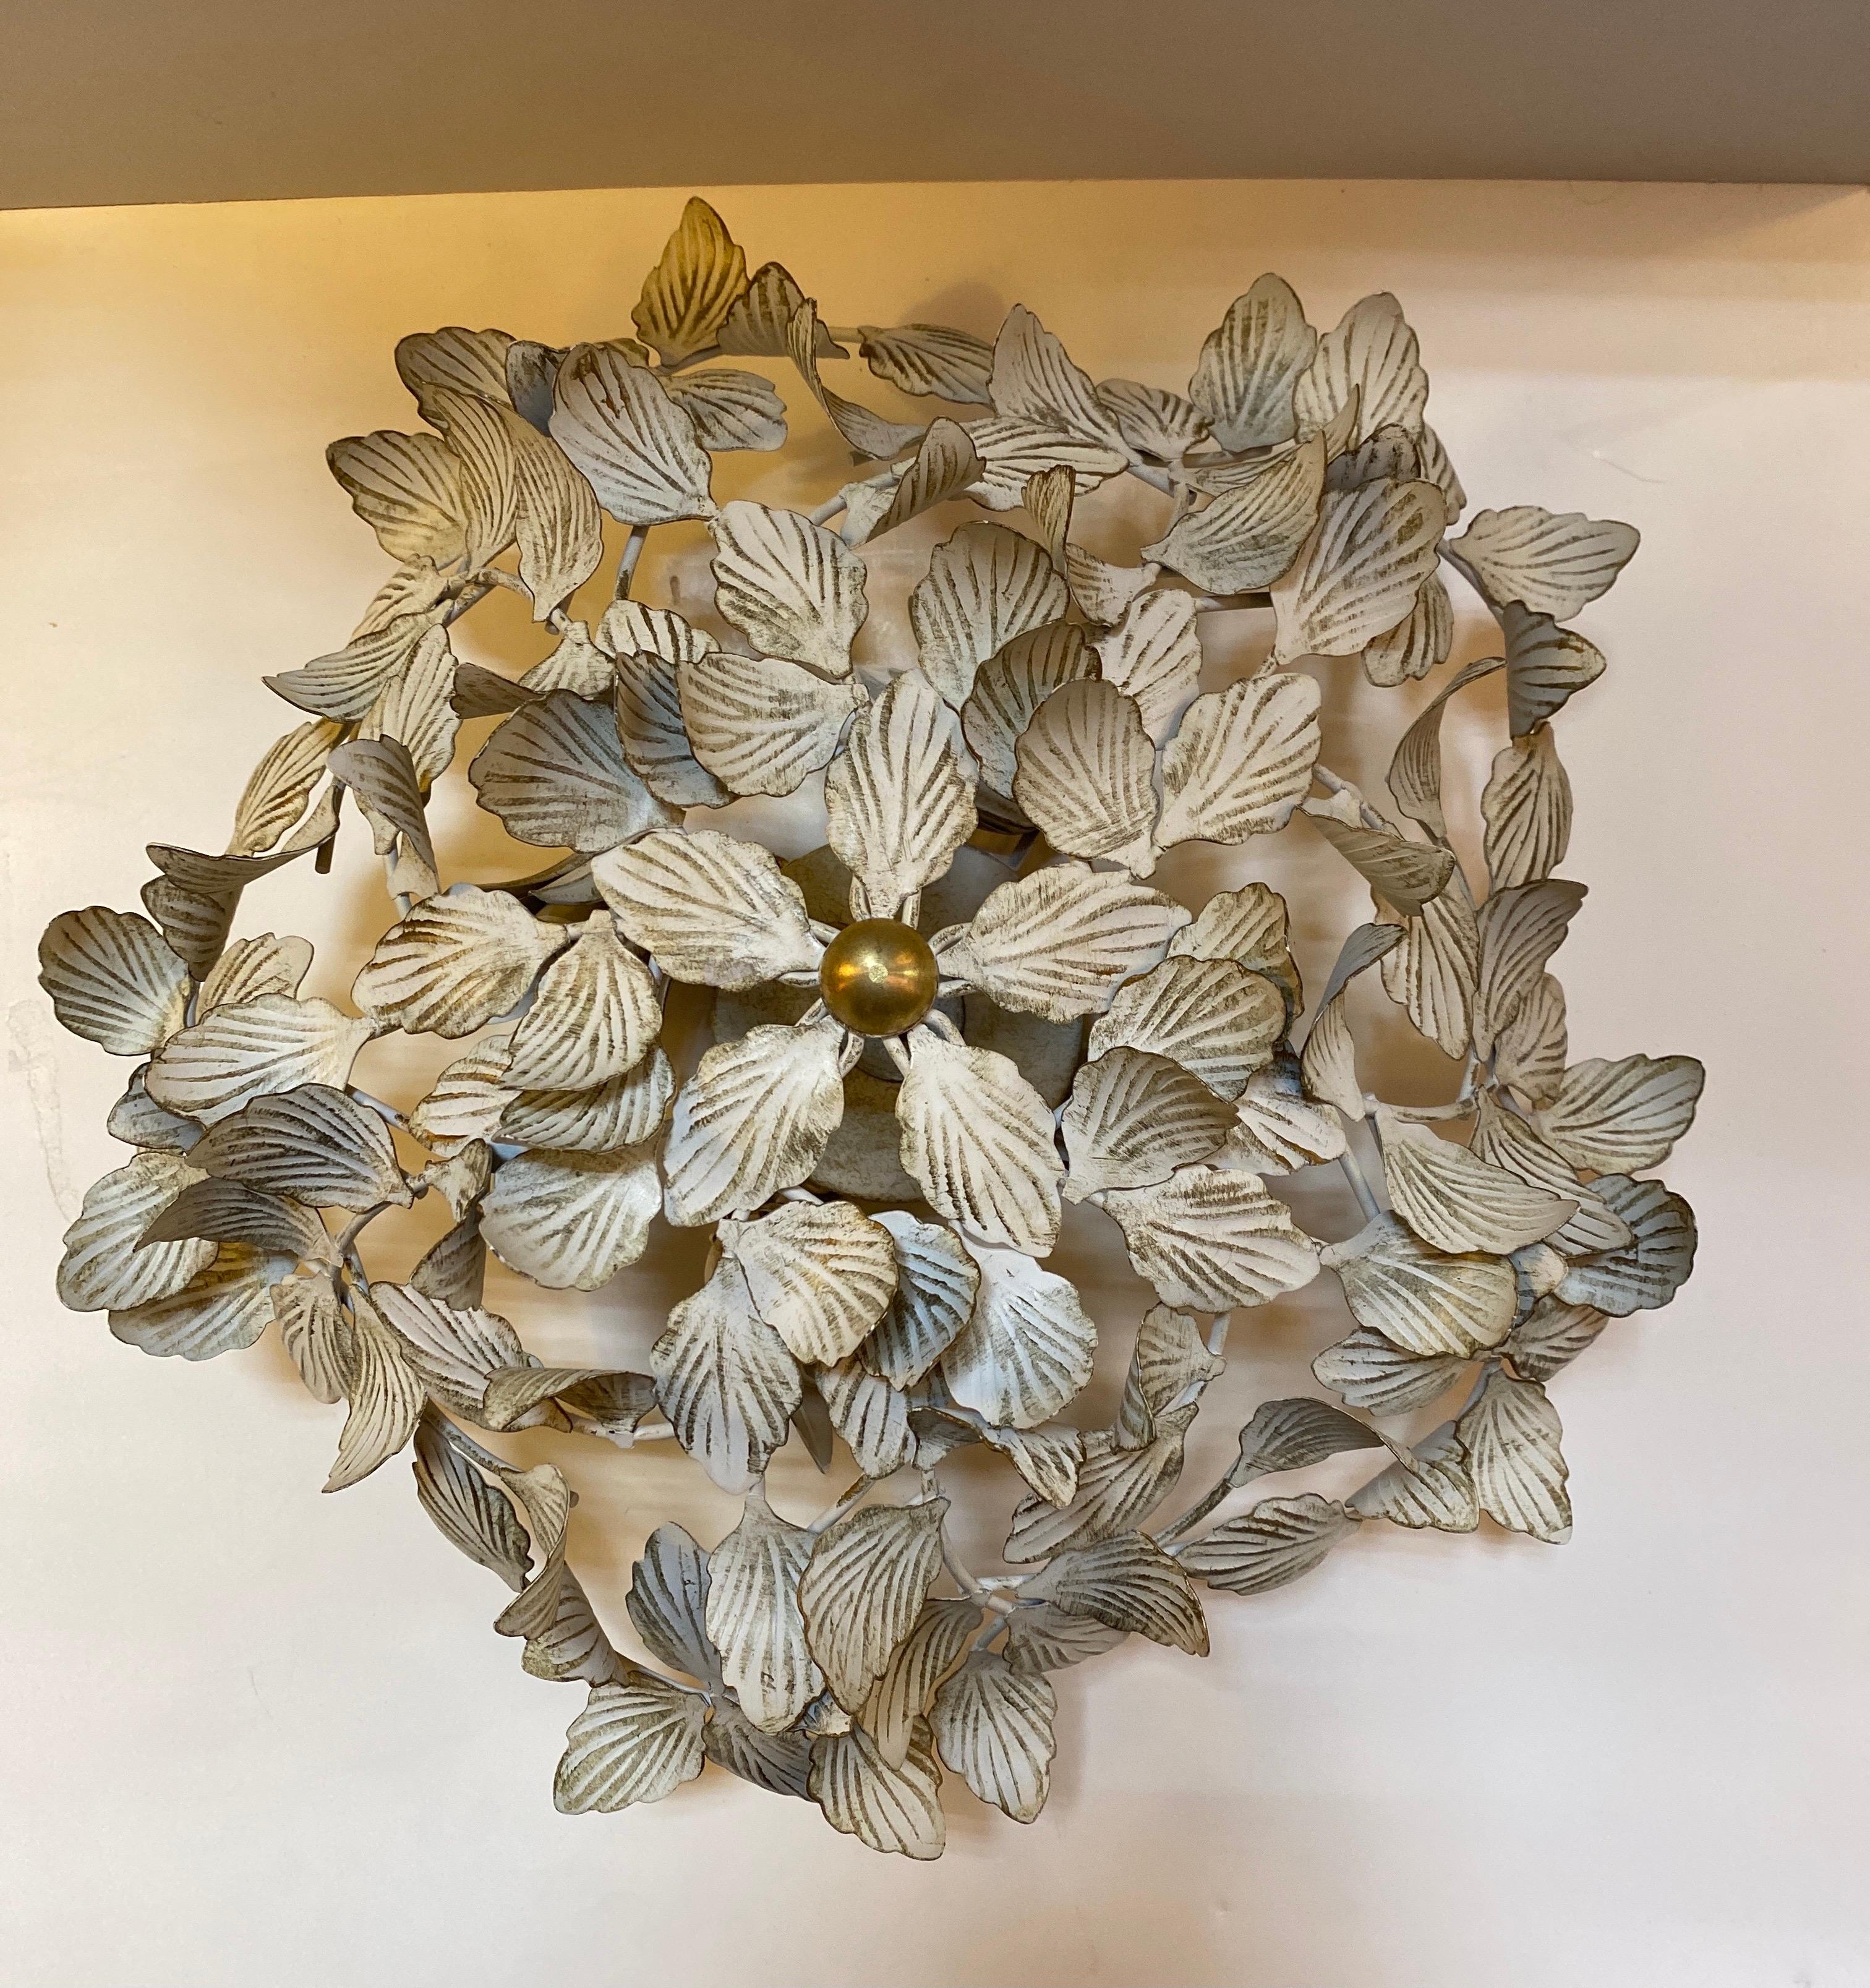 A vintage 4-light flush mount light fixture in the Hollywood Regency style. 

Features a round shape with fanciful ivy leaves in white tole, complemented by a brass finial.

USA, circa 1960.

Takes 4 (four) US candelabra base